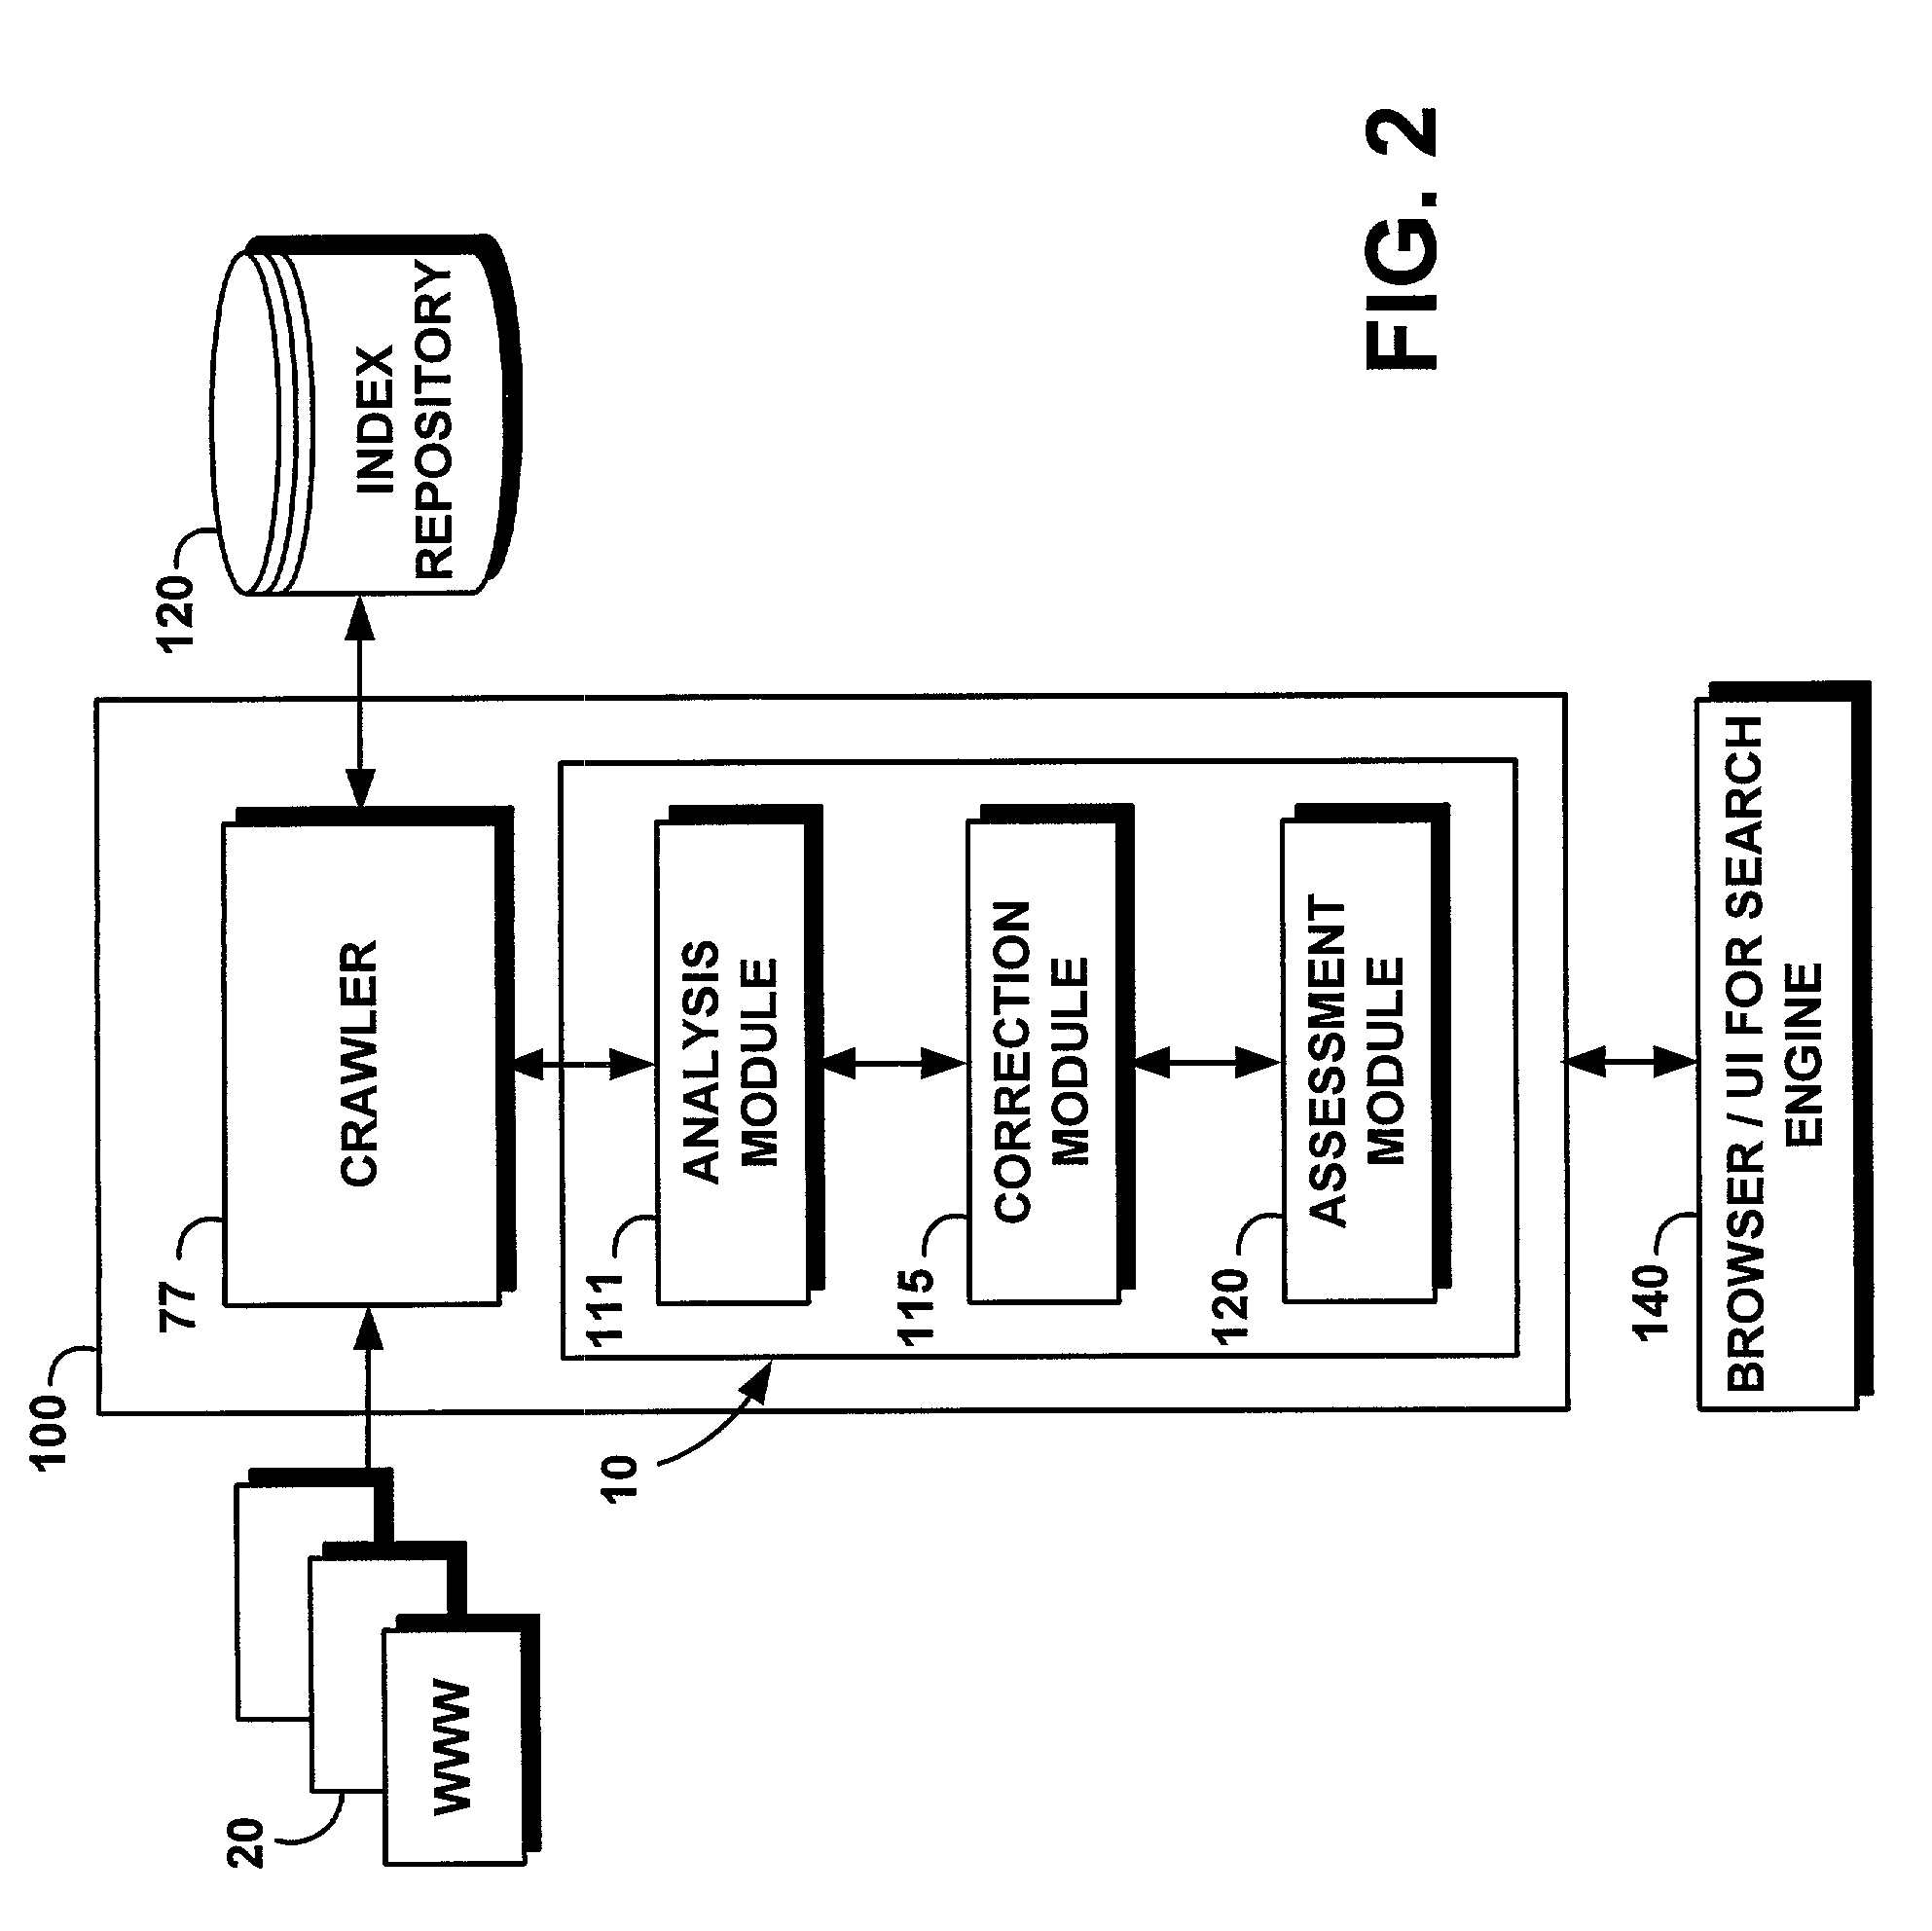 Method and system for using access patterns to improve web site hierarchy and organization